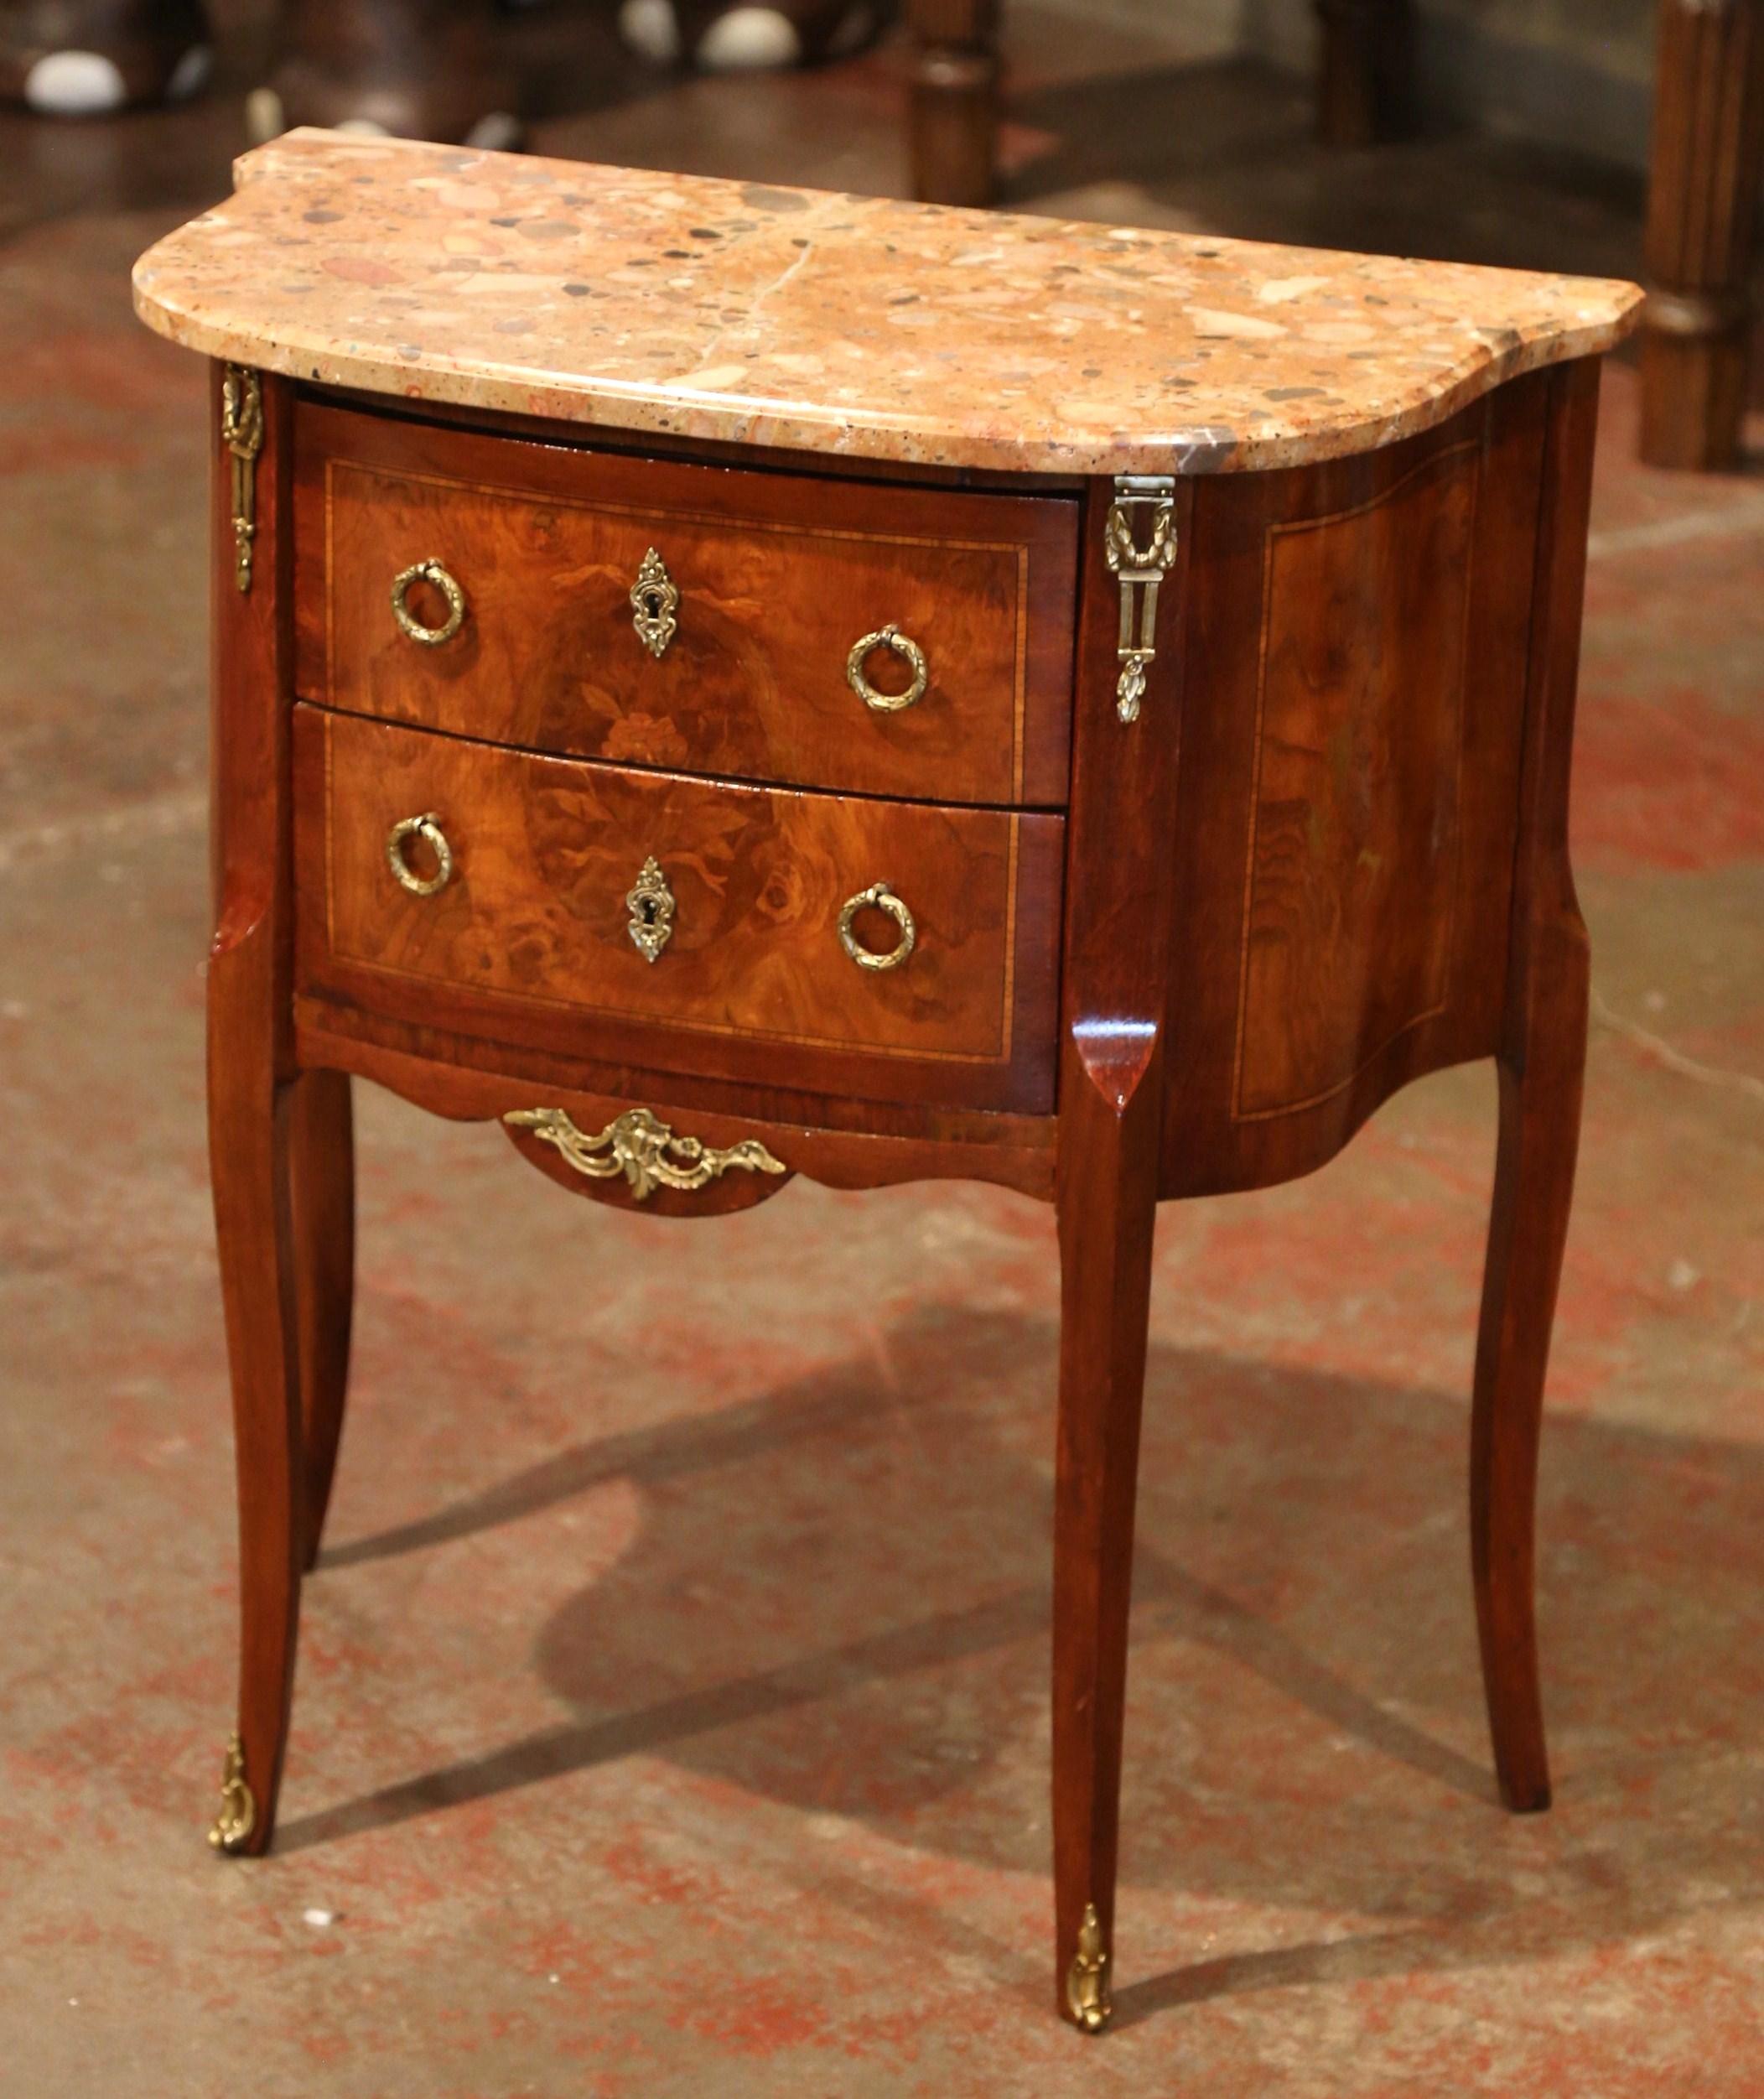 Decorate an living room with this elegant antique chest. Crafted in France, circa 1920, the cabinet sits on cabriole legs decorated with bronze caps over the feet. The fruitwood commode features two serpentine drawers across the front with inlay and